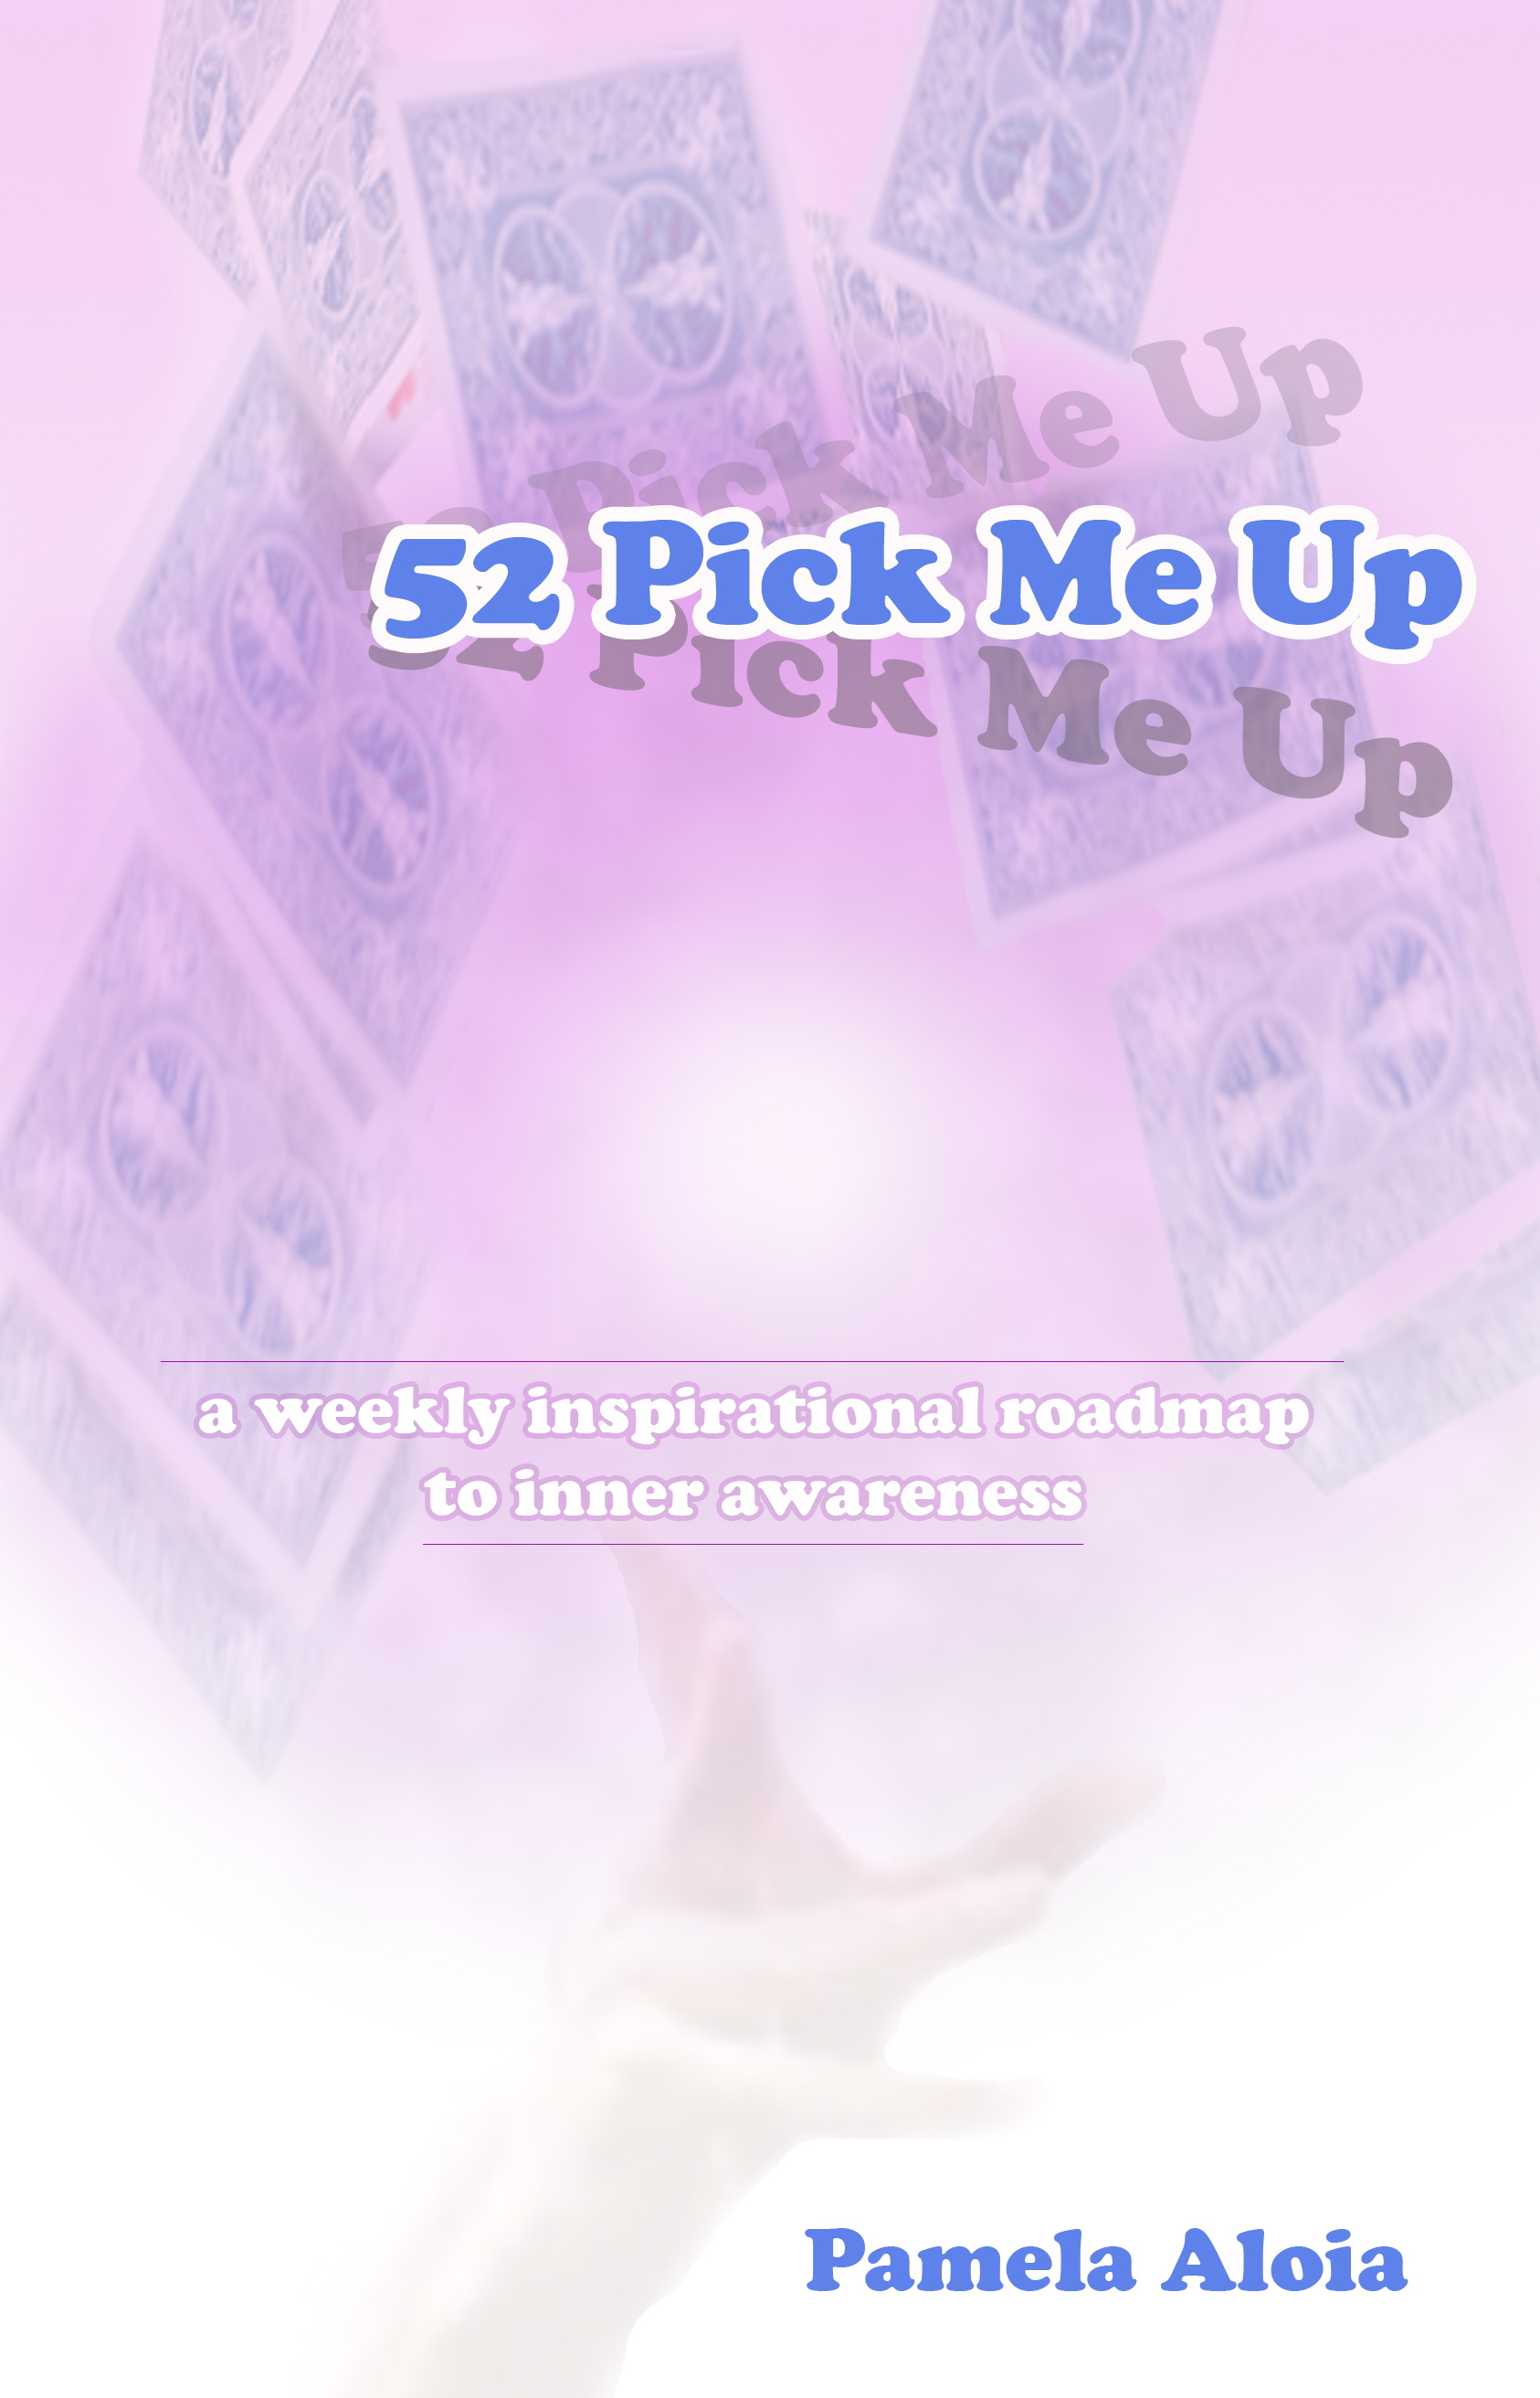 52PickMeUpcover front